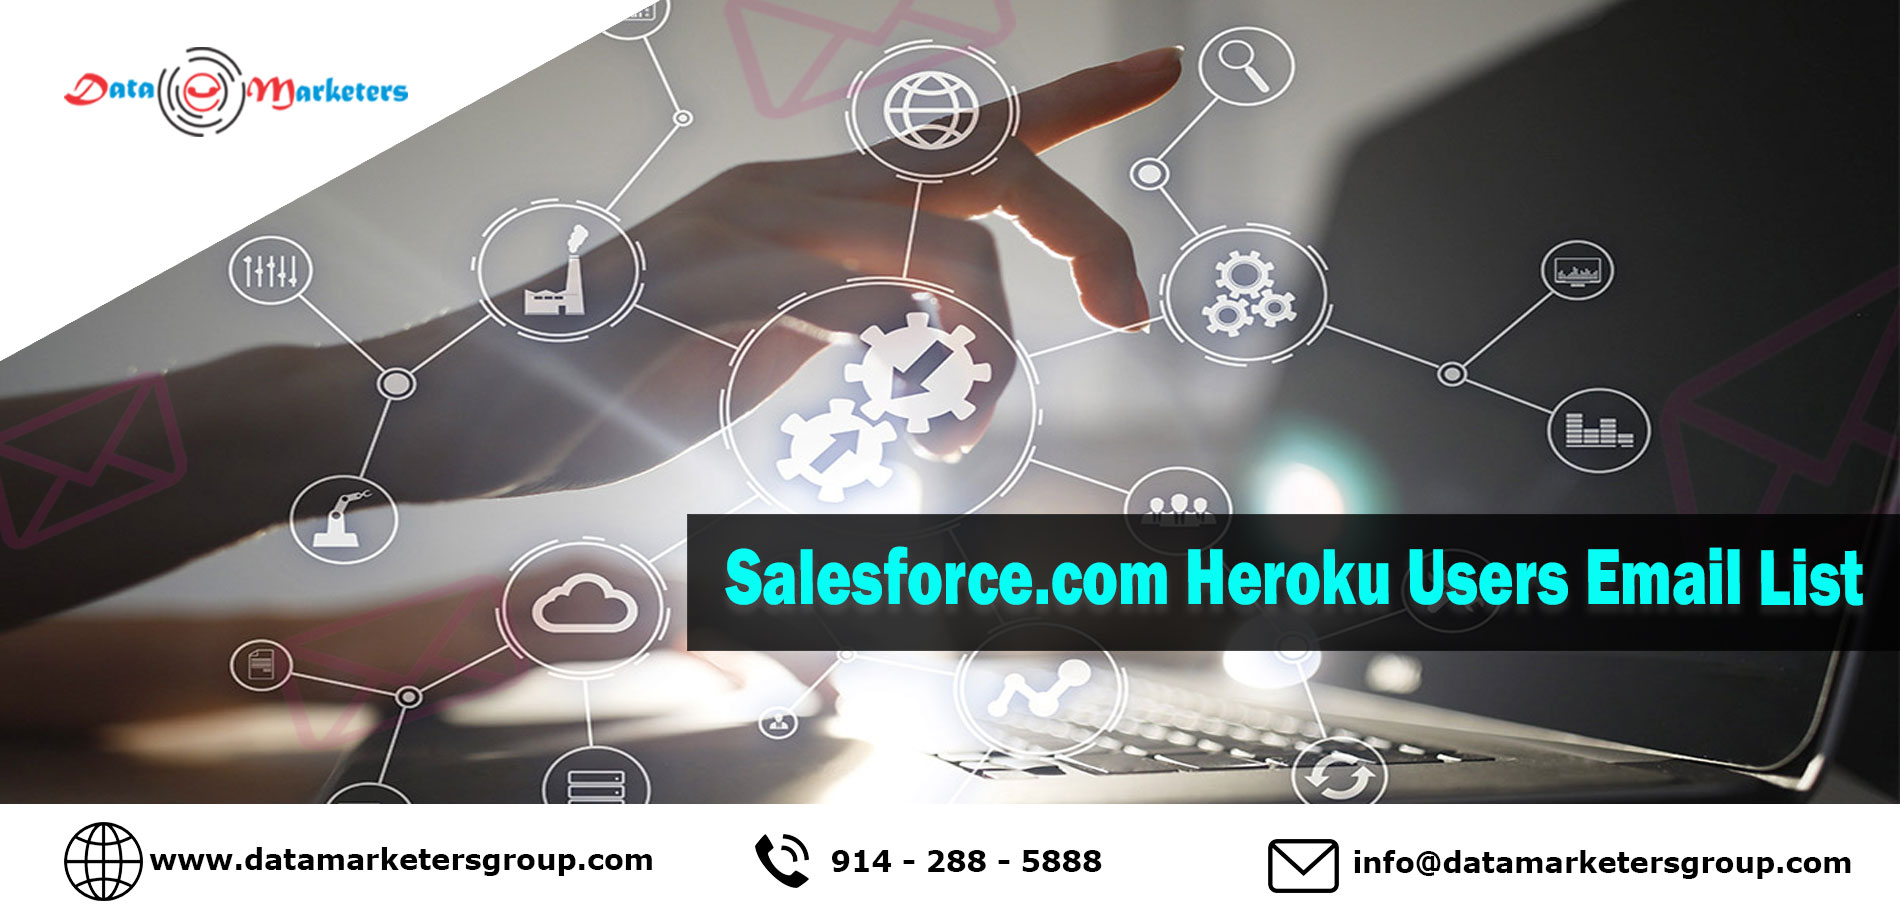 Salesforce Heroku Users Email List | Data Marketers Group